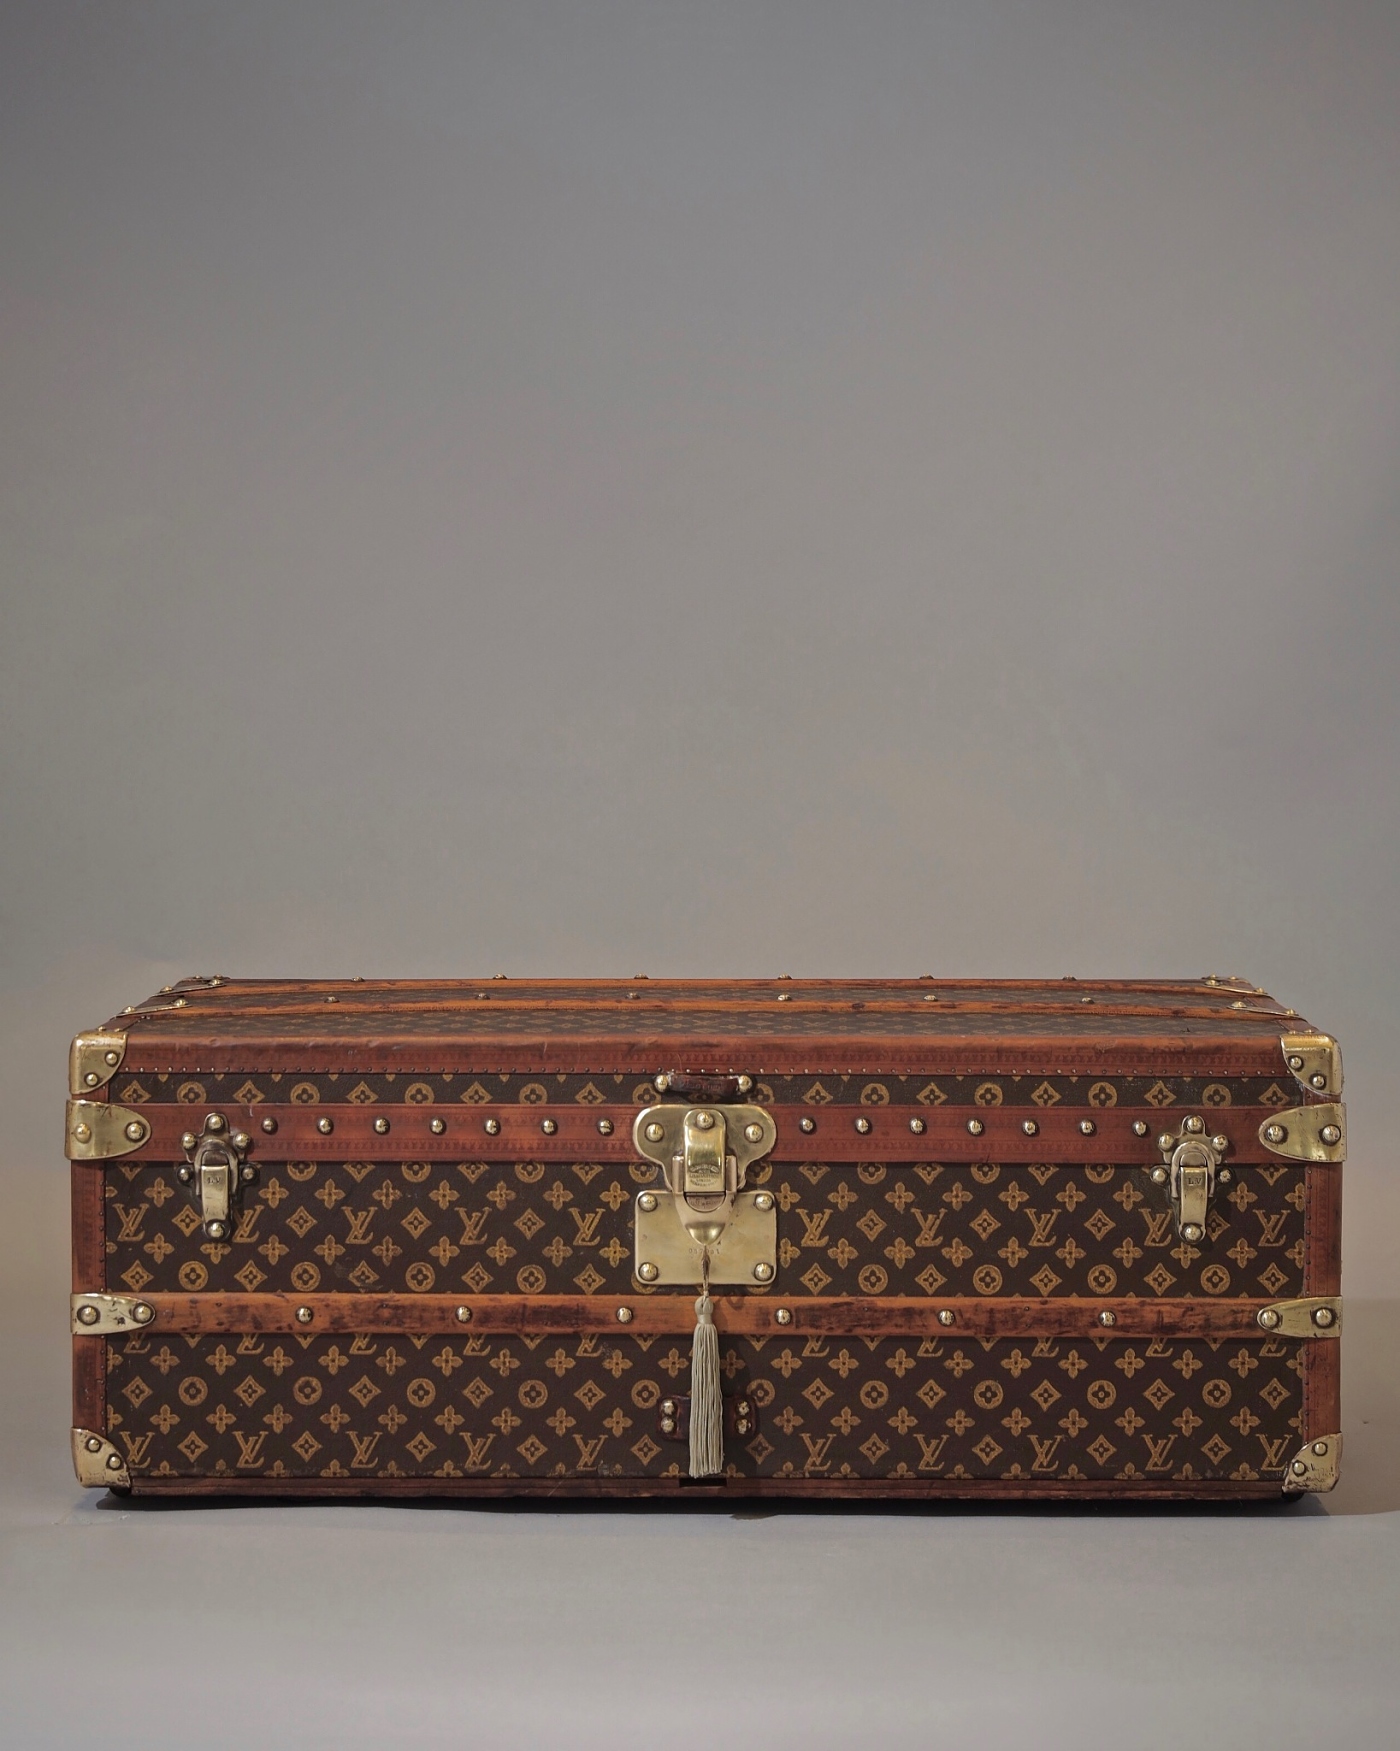 the-well-traveled-trunk-louis-vuitton-thumbnail-product-5706-1